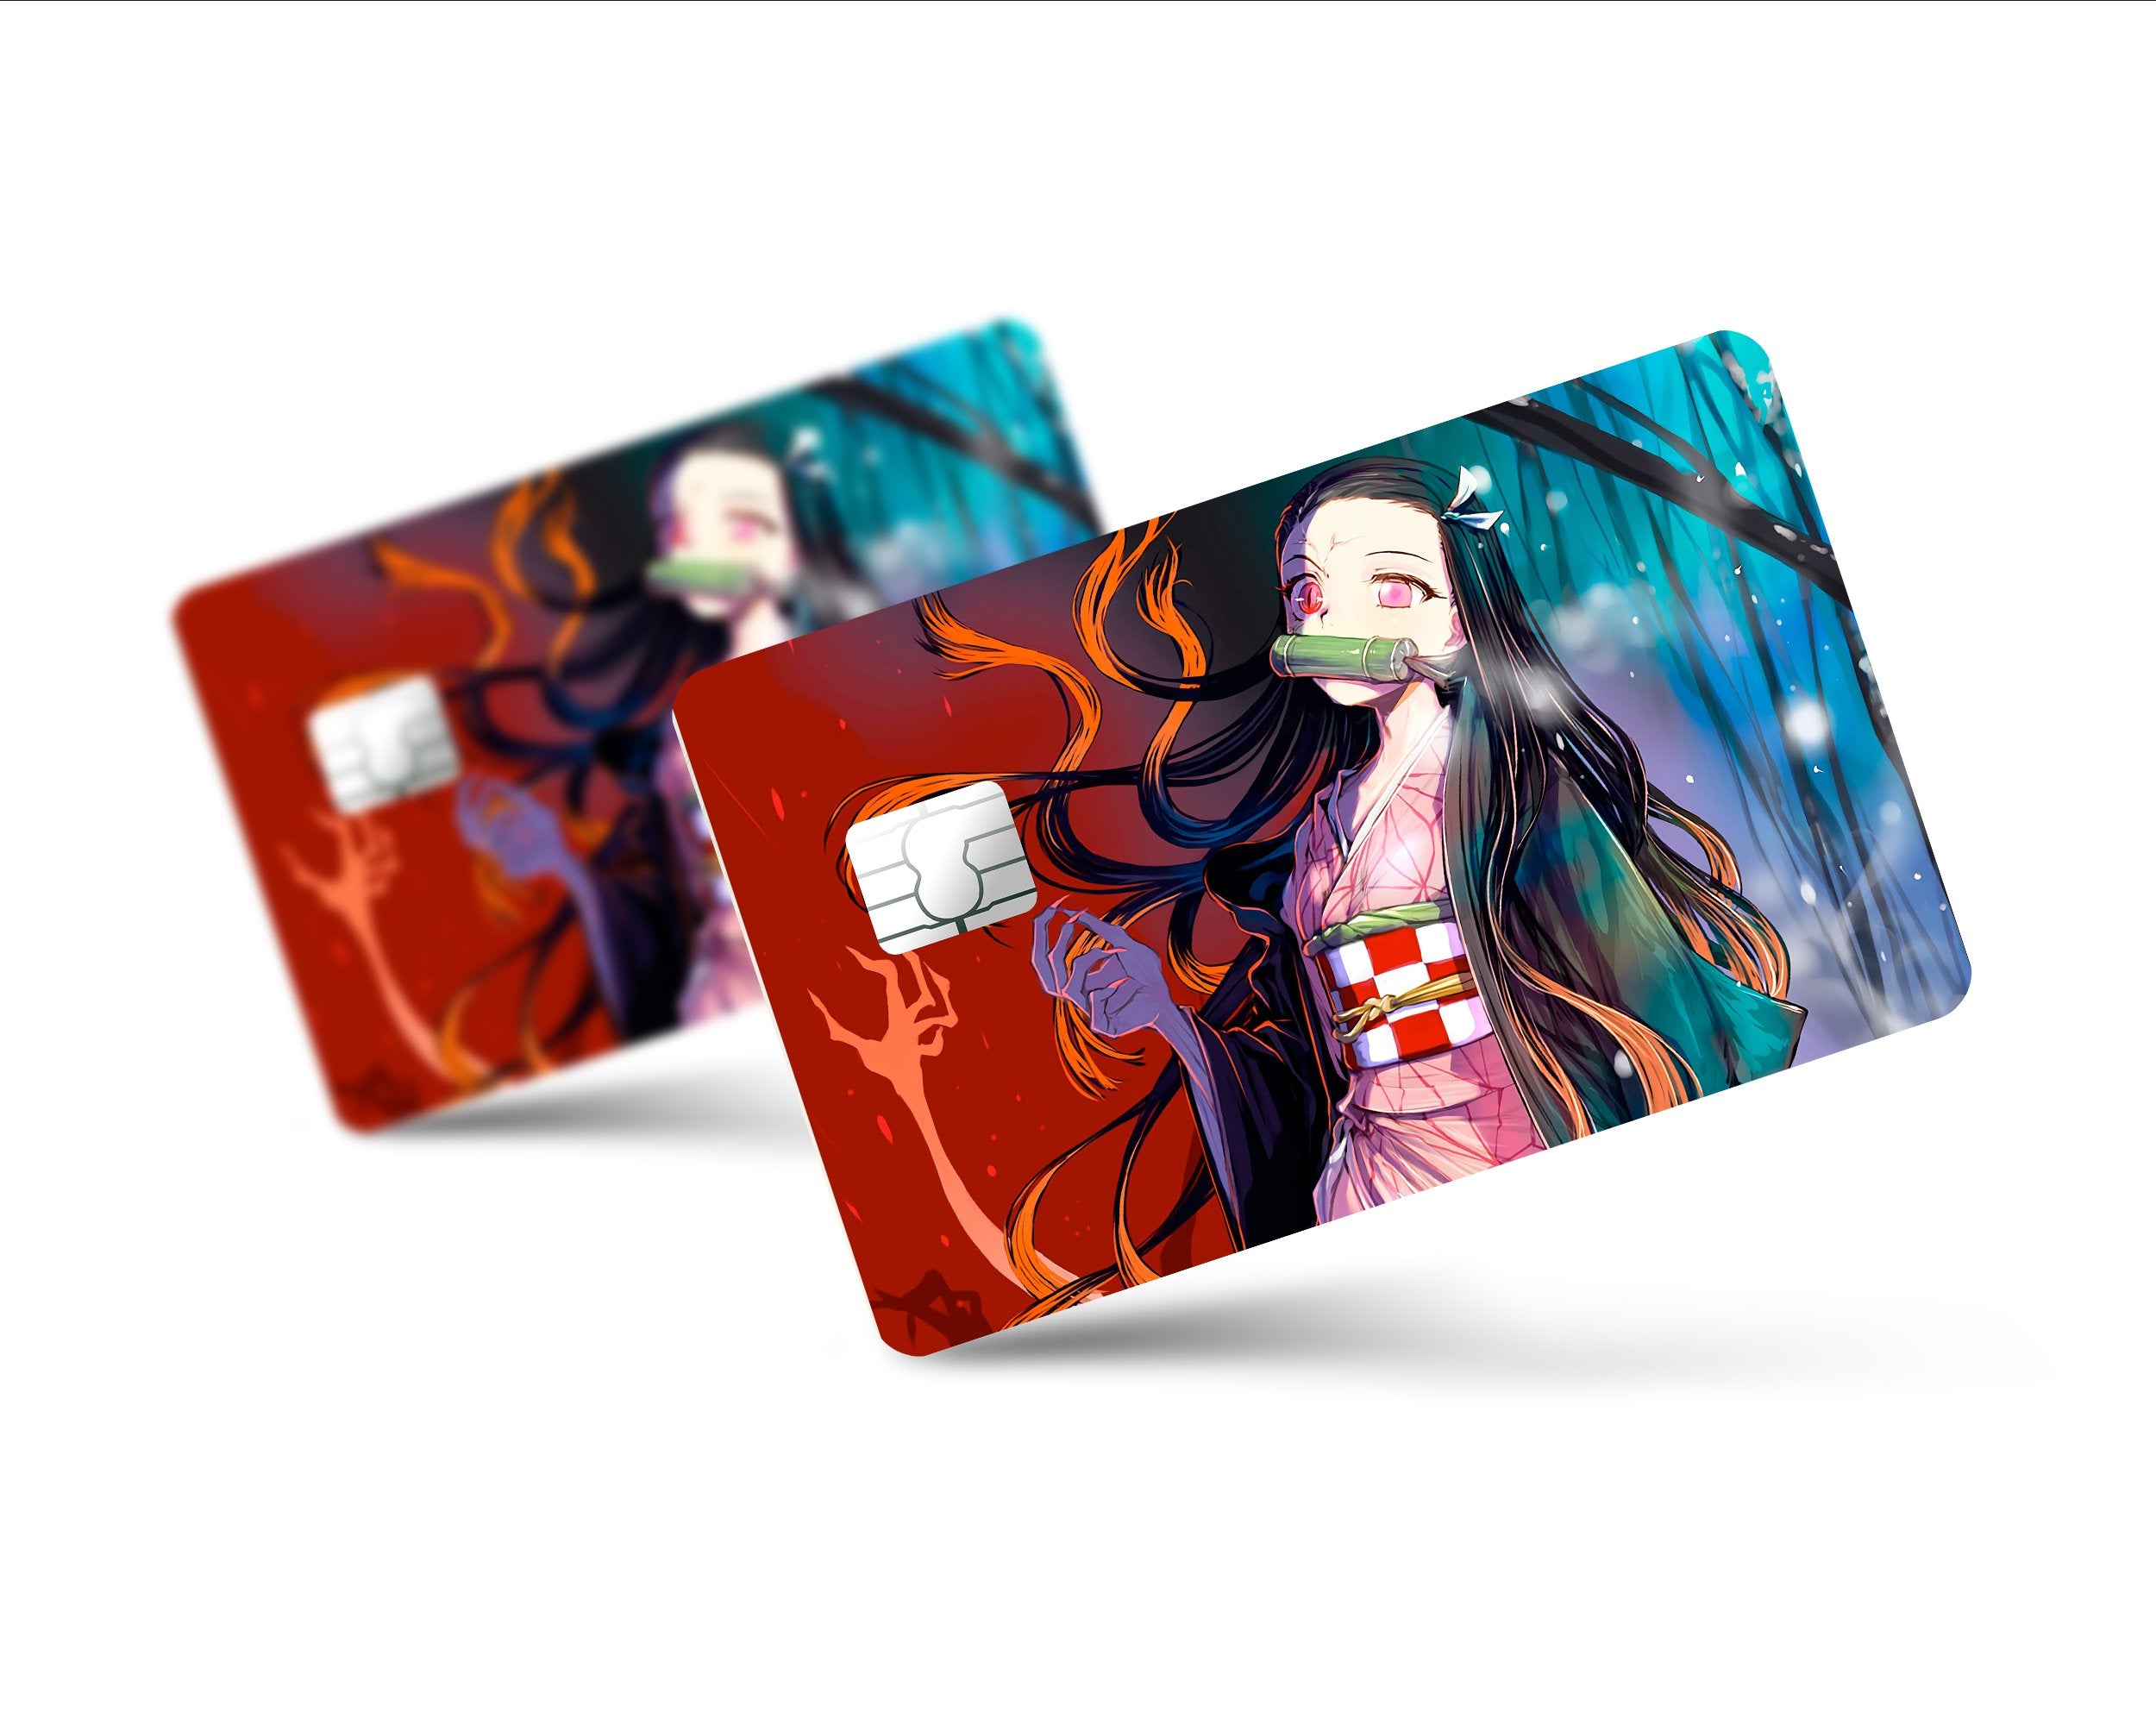 WeebNation Satoru Gojo - Jujutsu Kaisen - 4pcs Anime Card Sticker for Debit,  Credit Card Skin - Cover and Personalize Bank Card - Tearproof, Waterproof  Card Cover - Highest-Grade Quality, No Bubble :